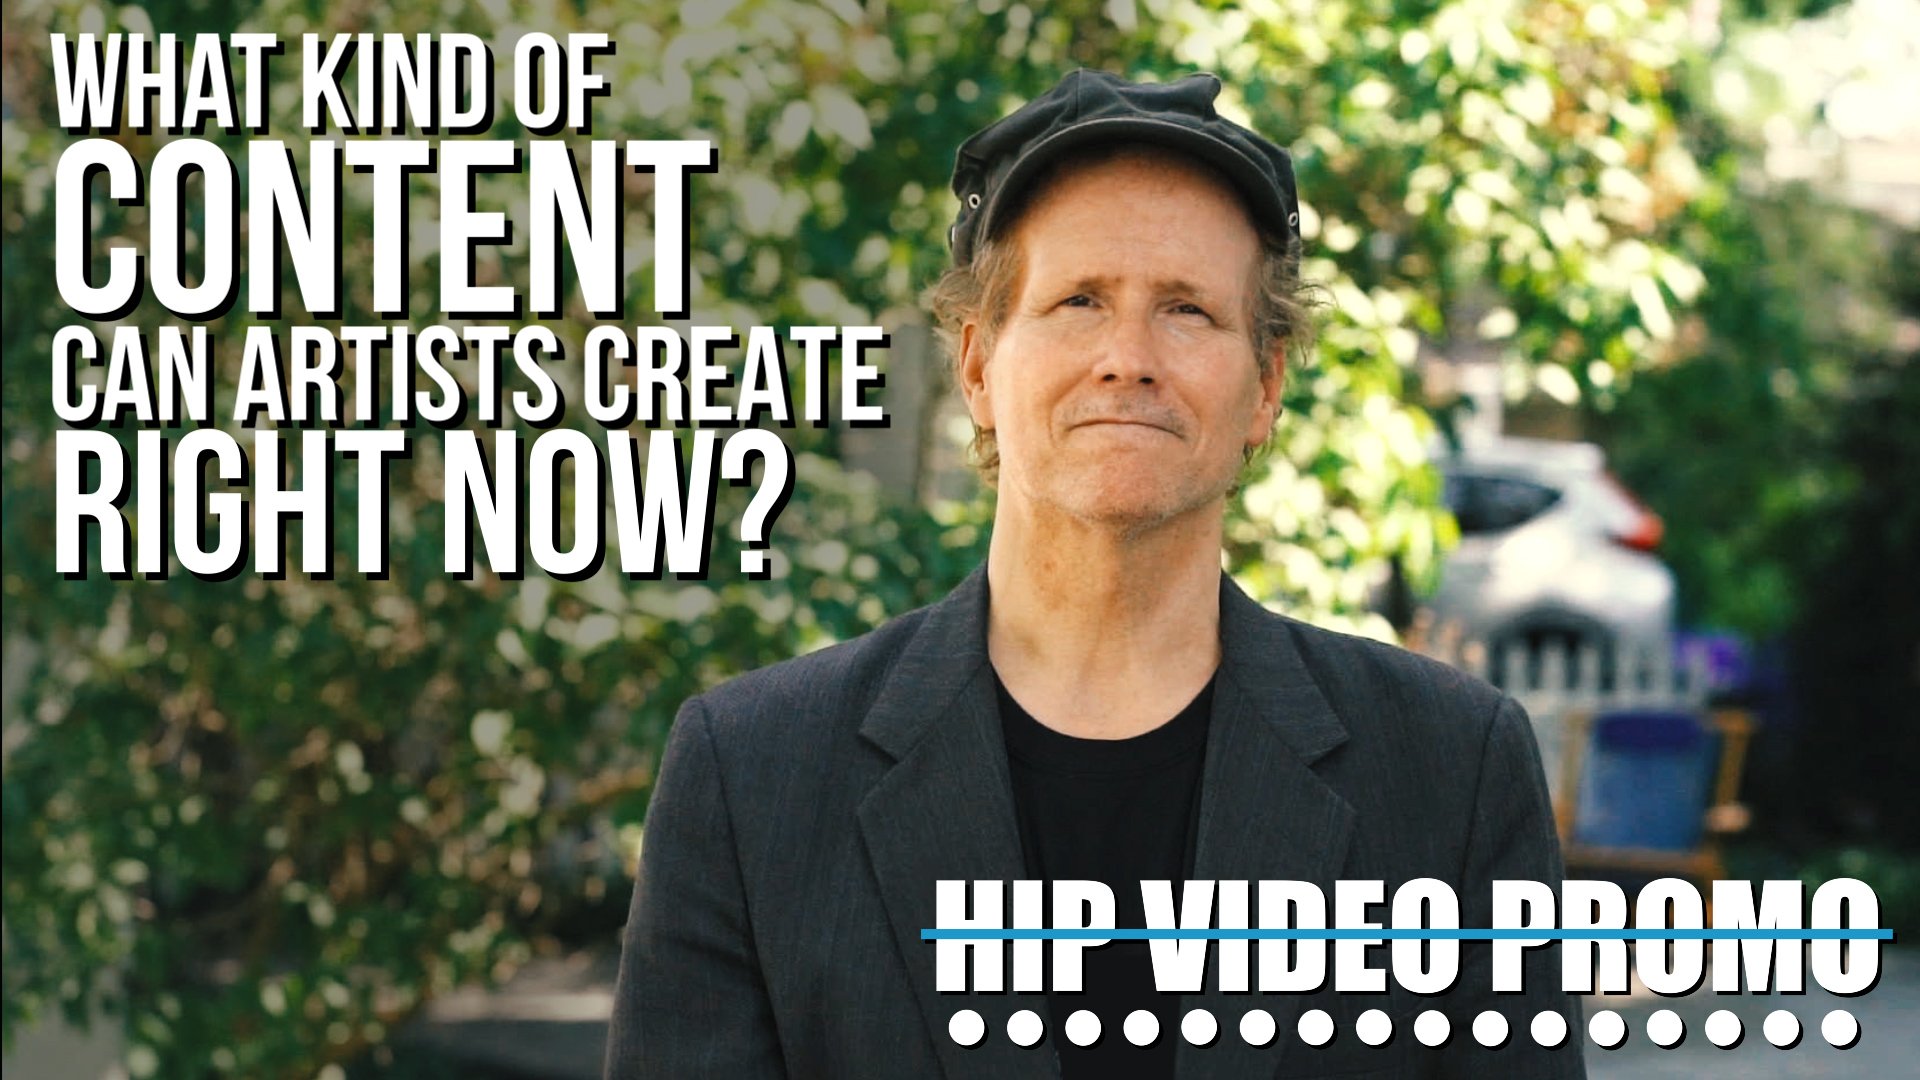 Music video production: what kind of content can artists create right now?